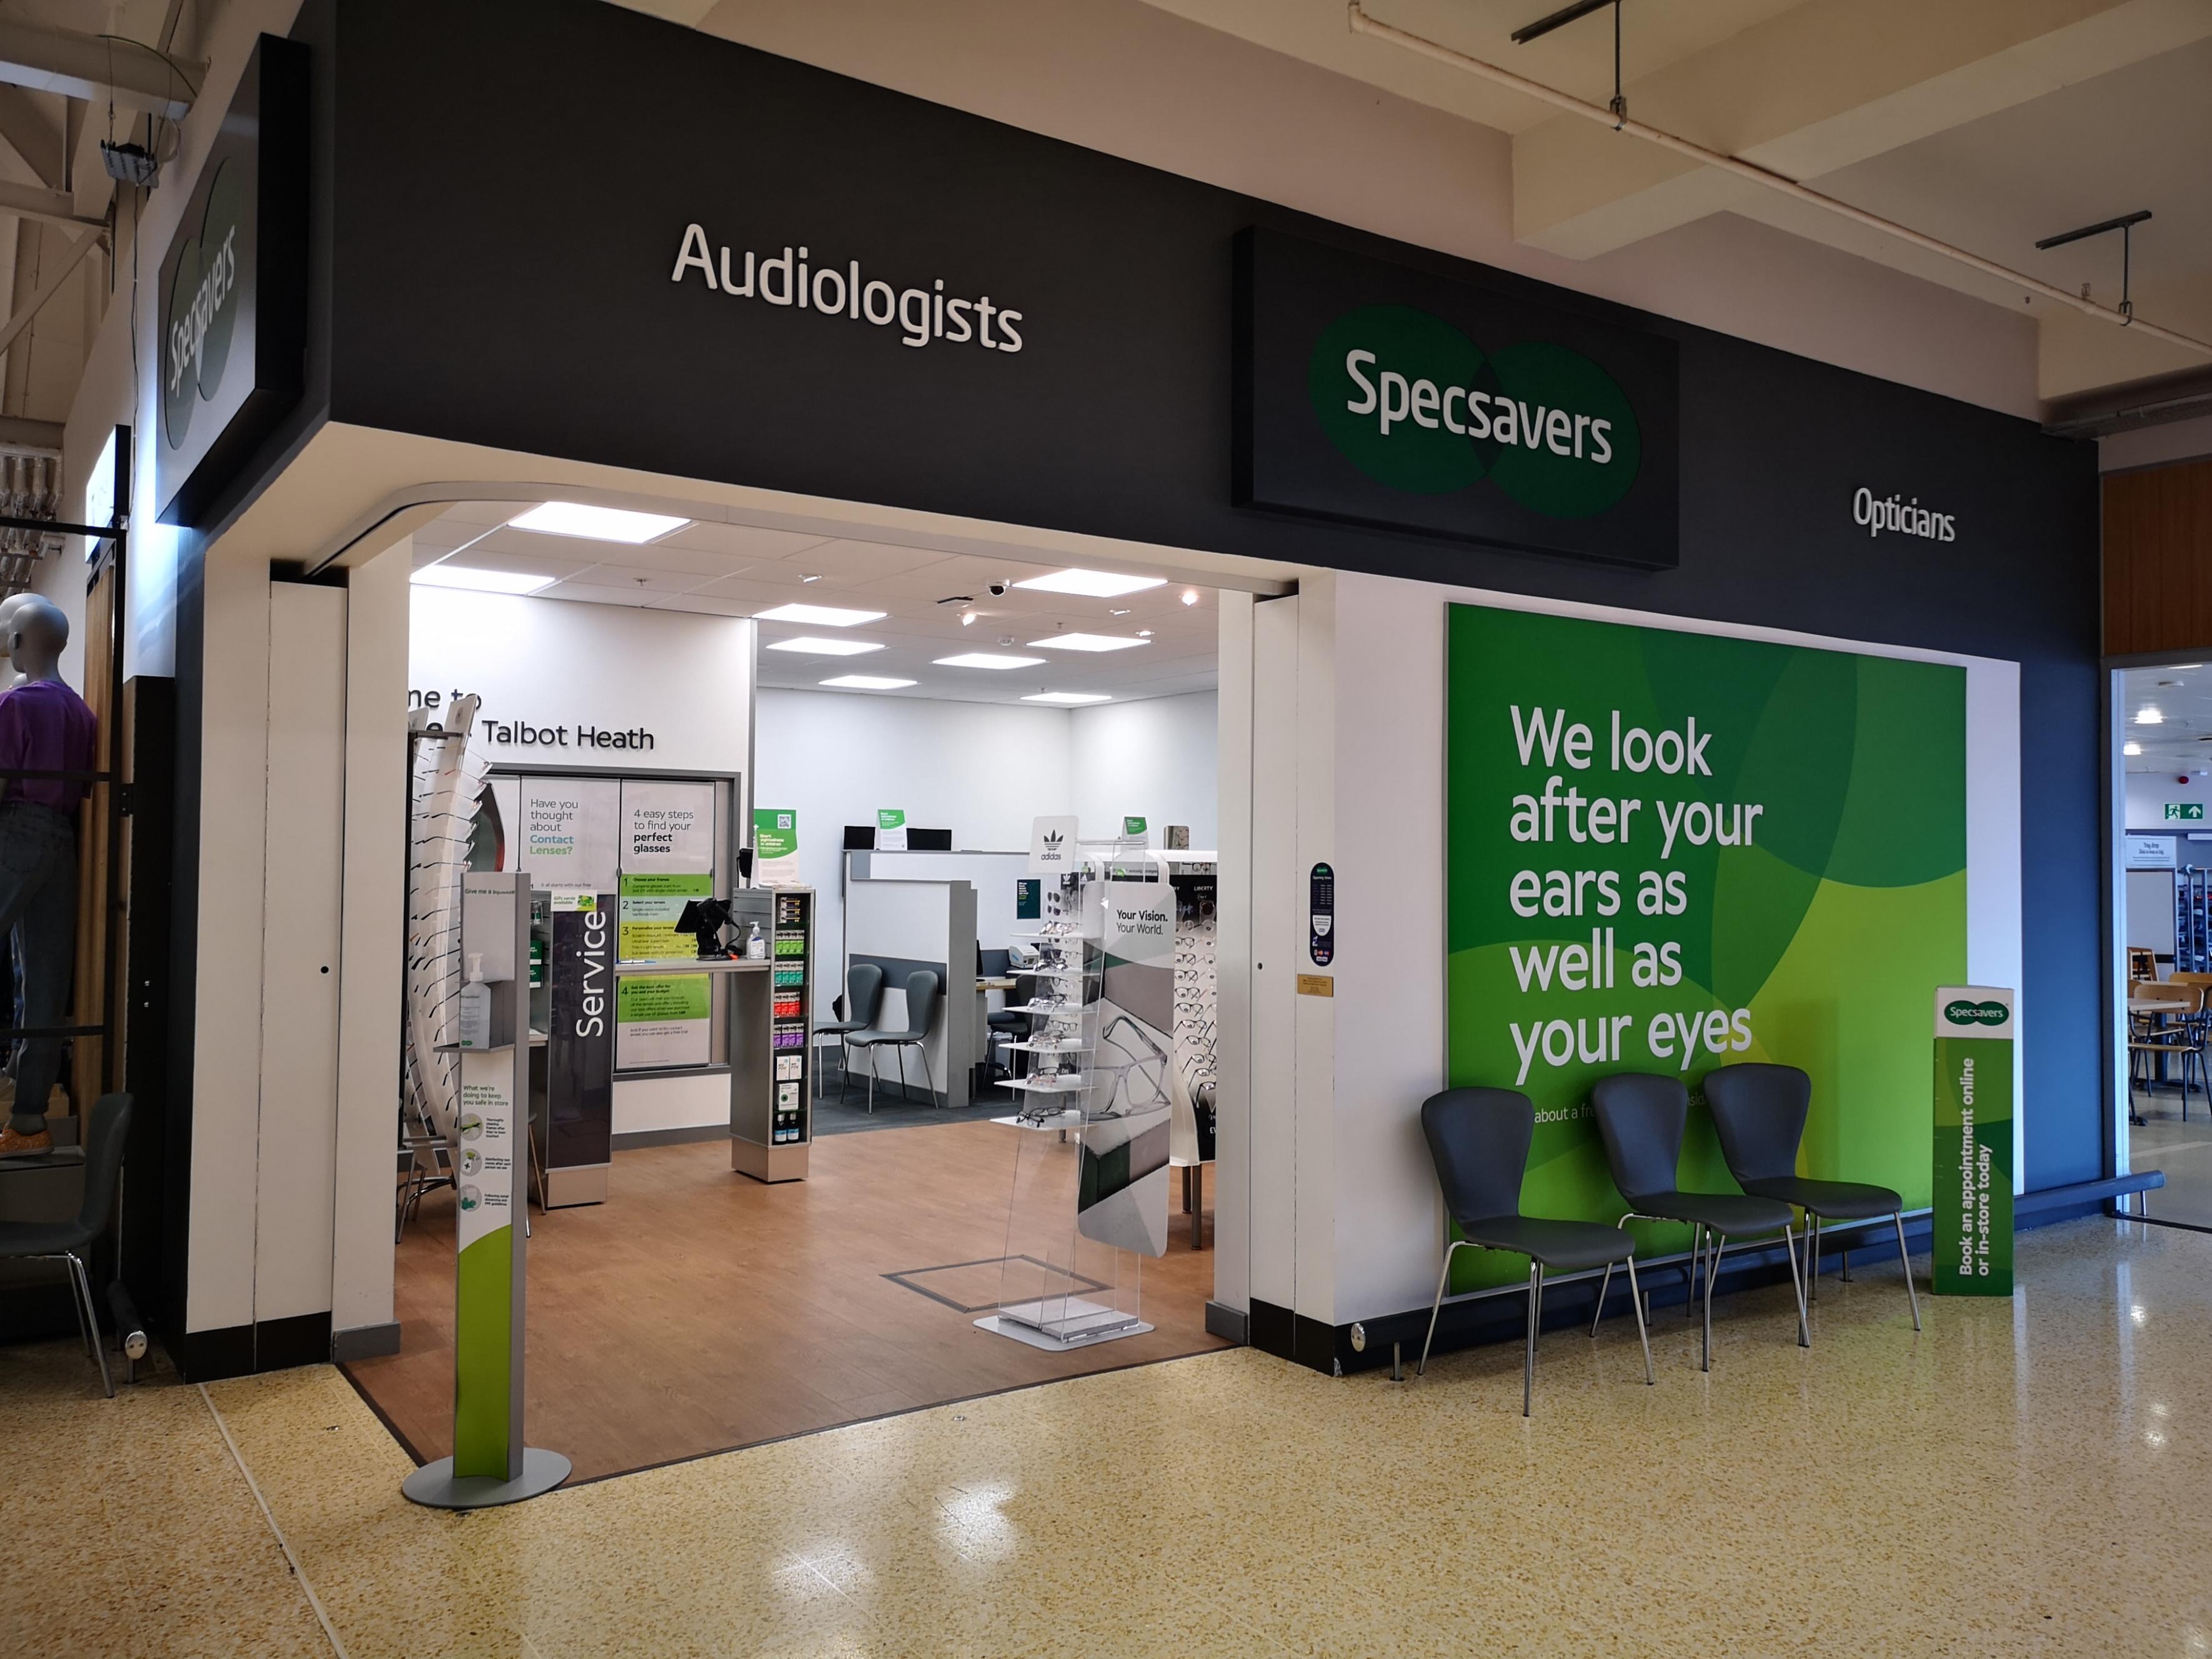 Images Specsavers Opticians and Audiologists - Talbot Heath Sainsbury's